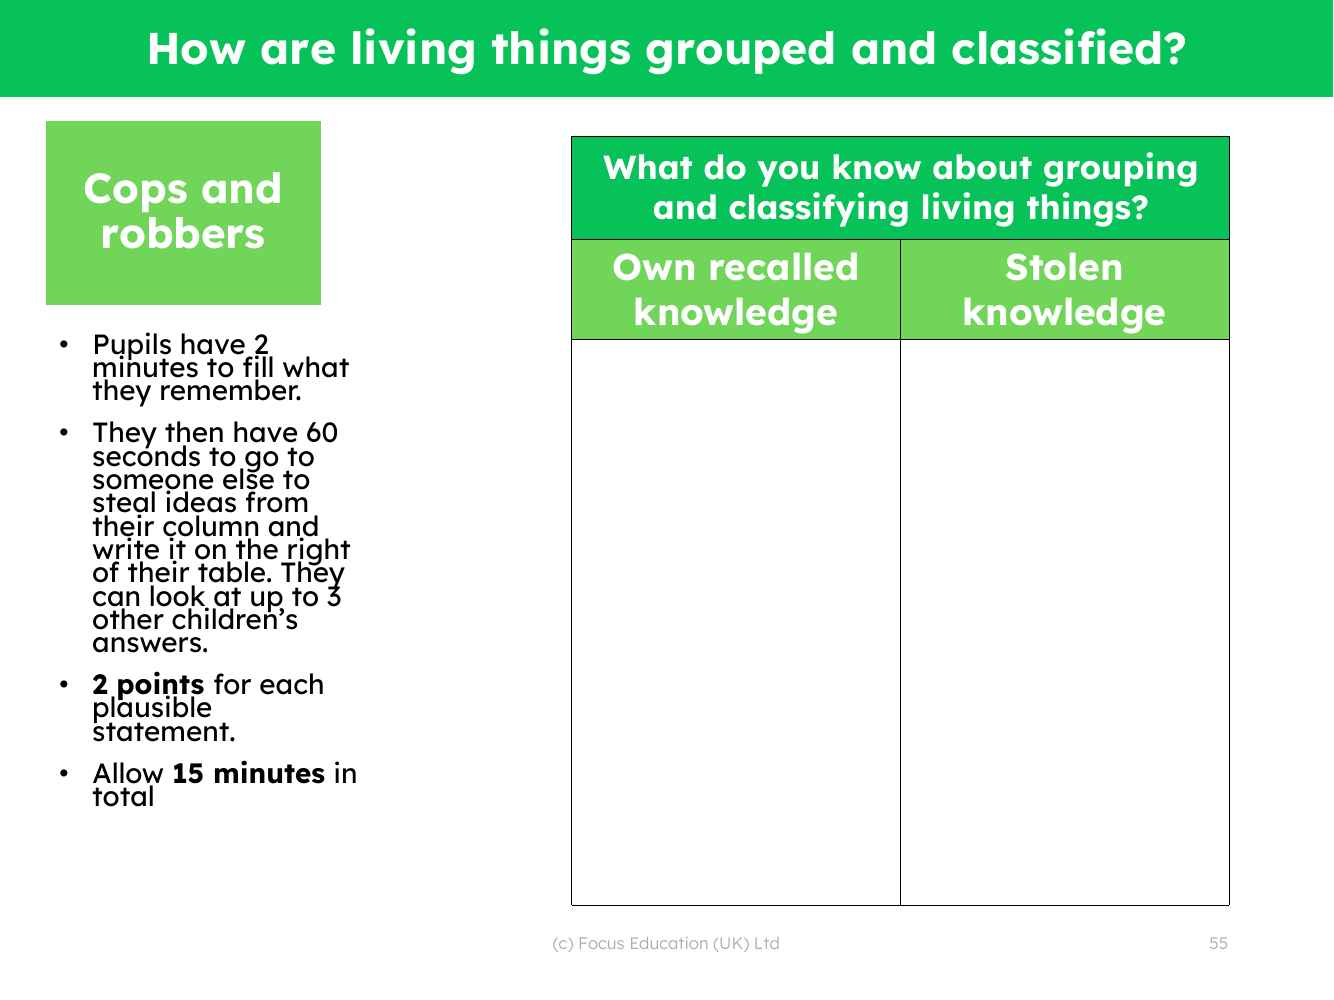 Cops and robbers - What do you know about grouping and classifying living things?